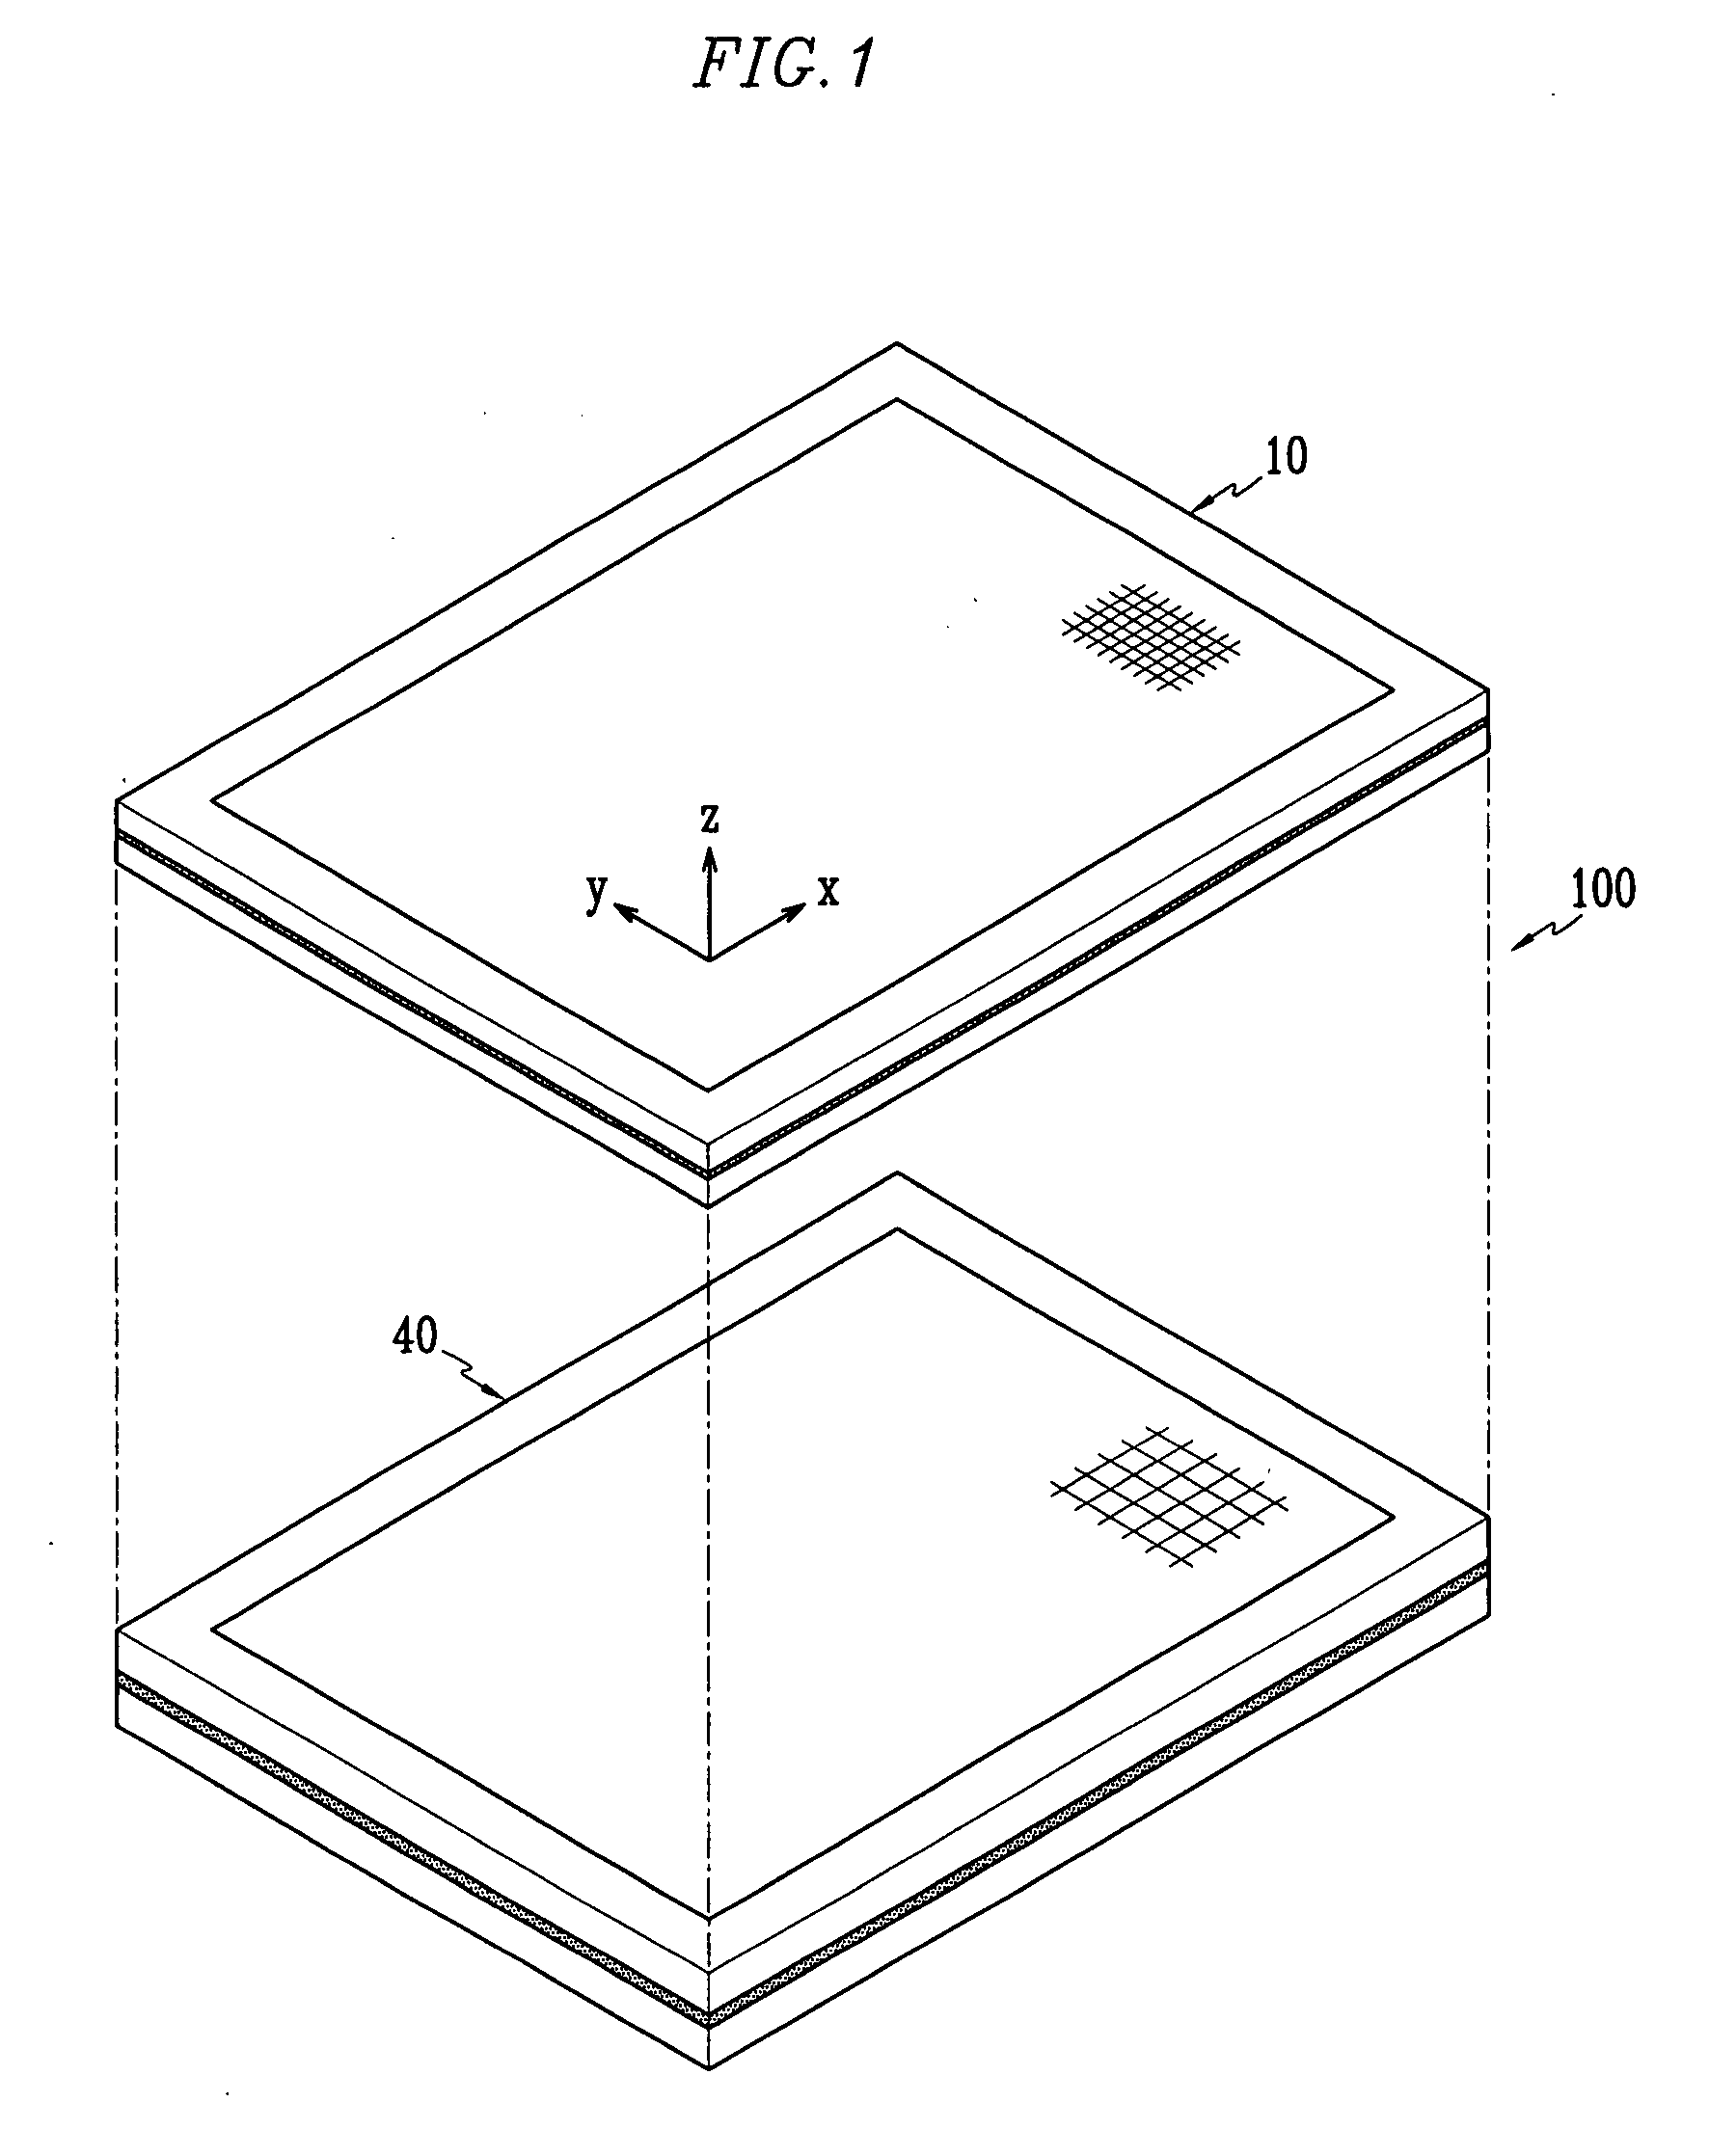 Display device and method of driving the display device